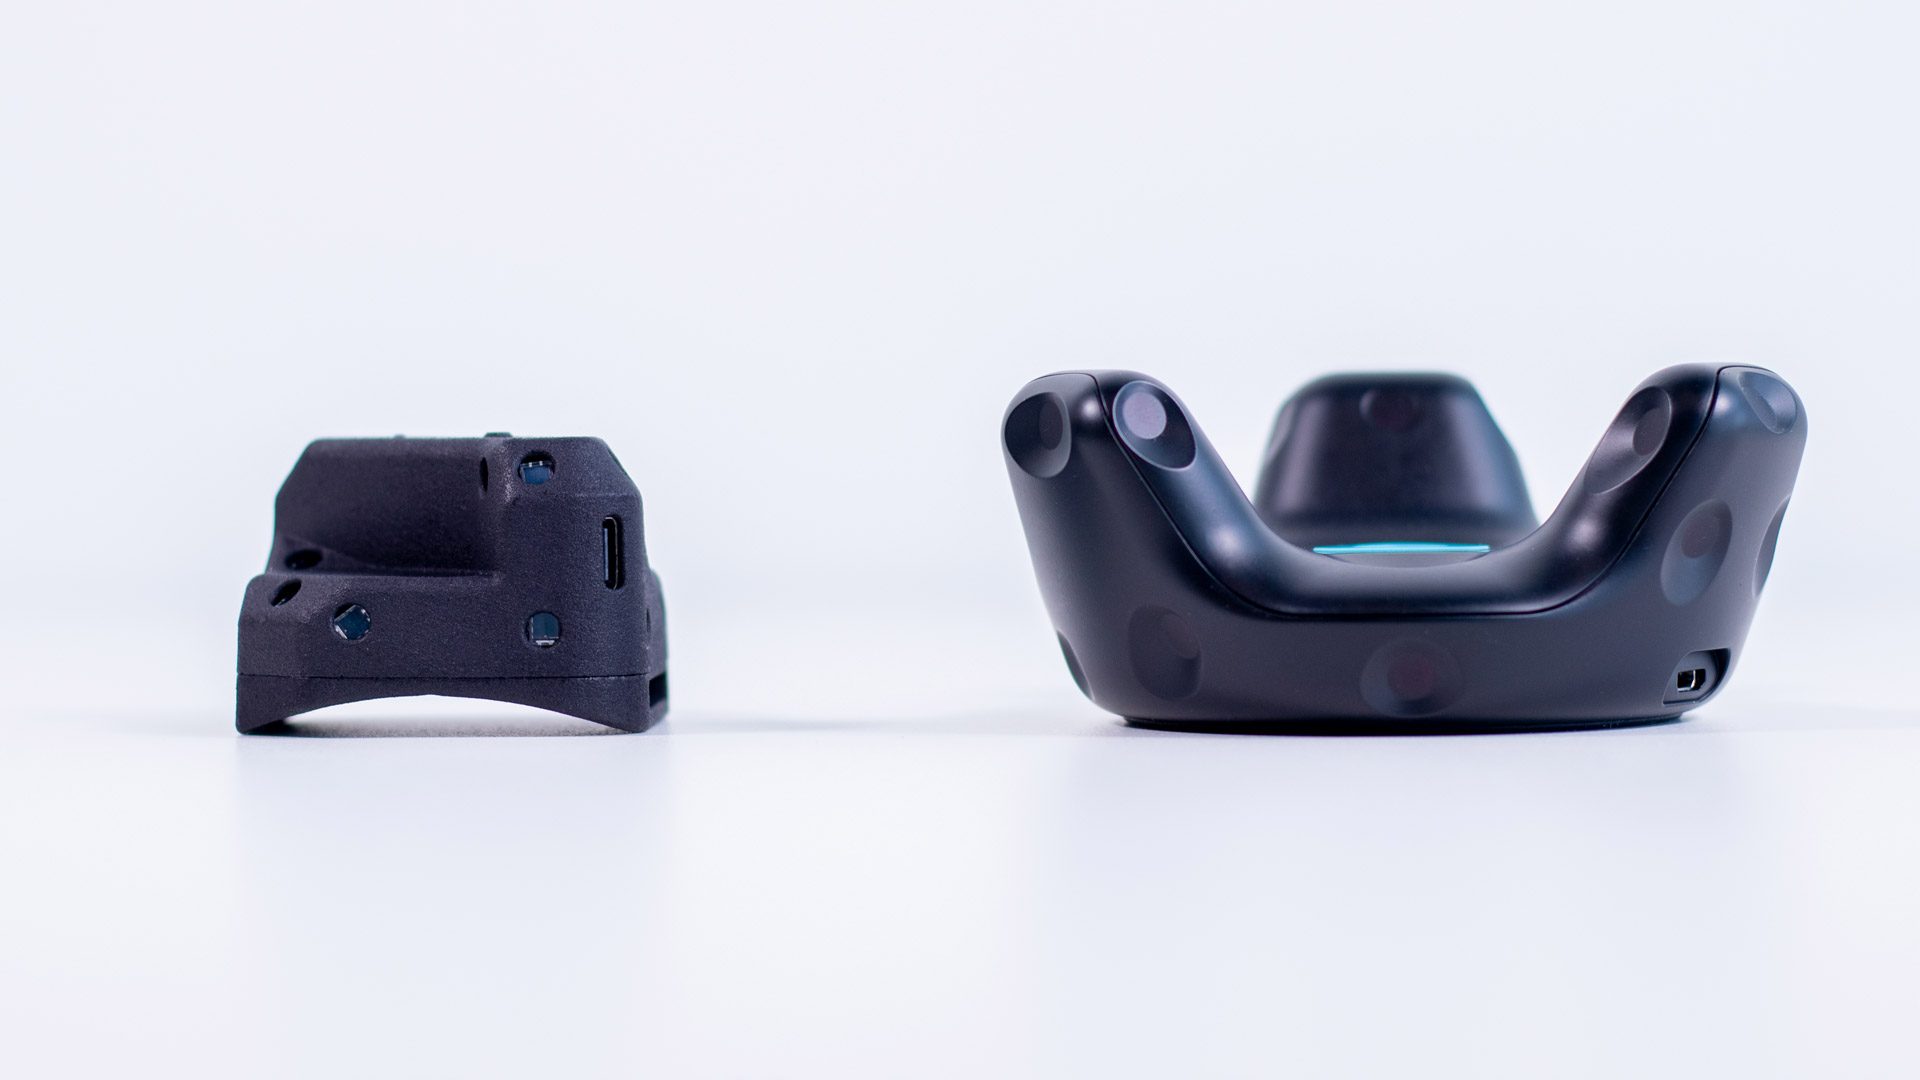 Tundra Tracker Kickstarter Coming March, First Deliveries Expected 